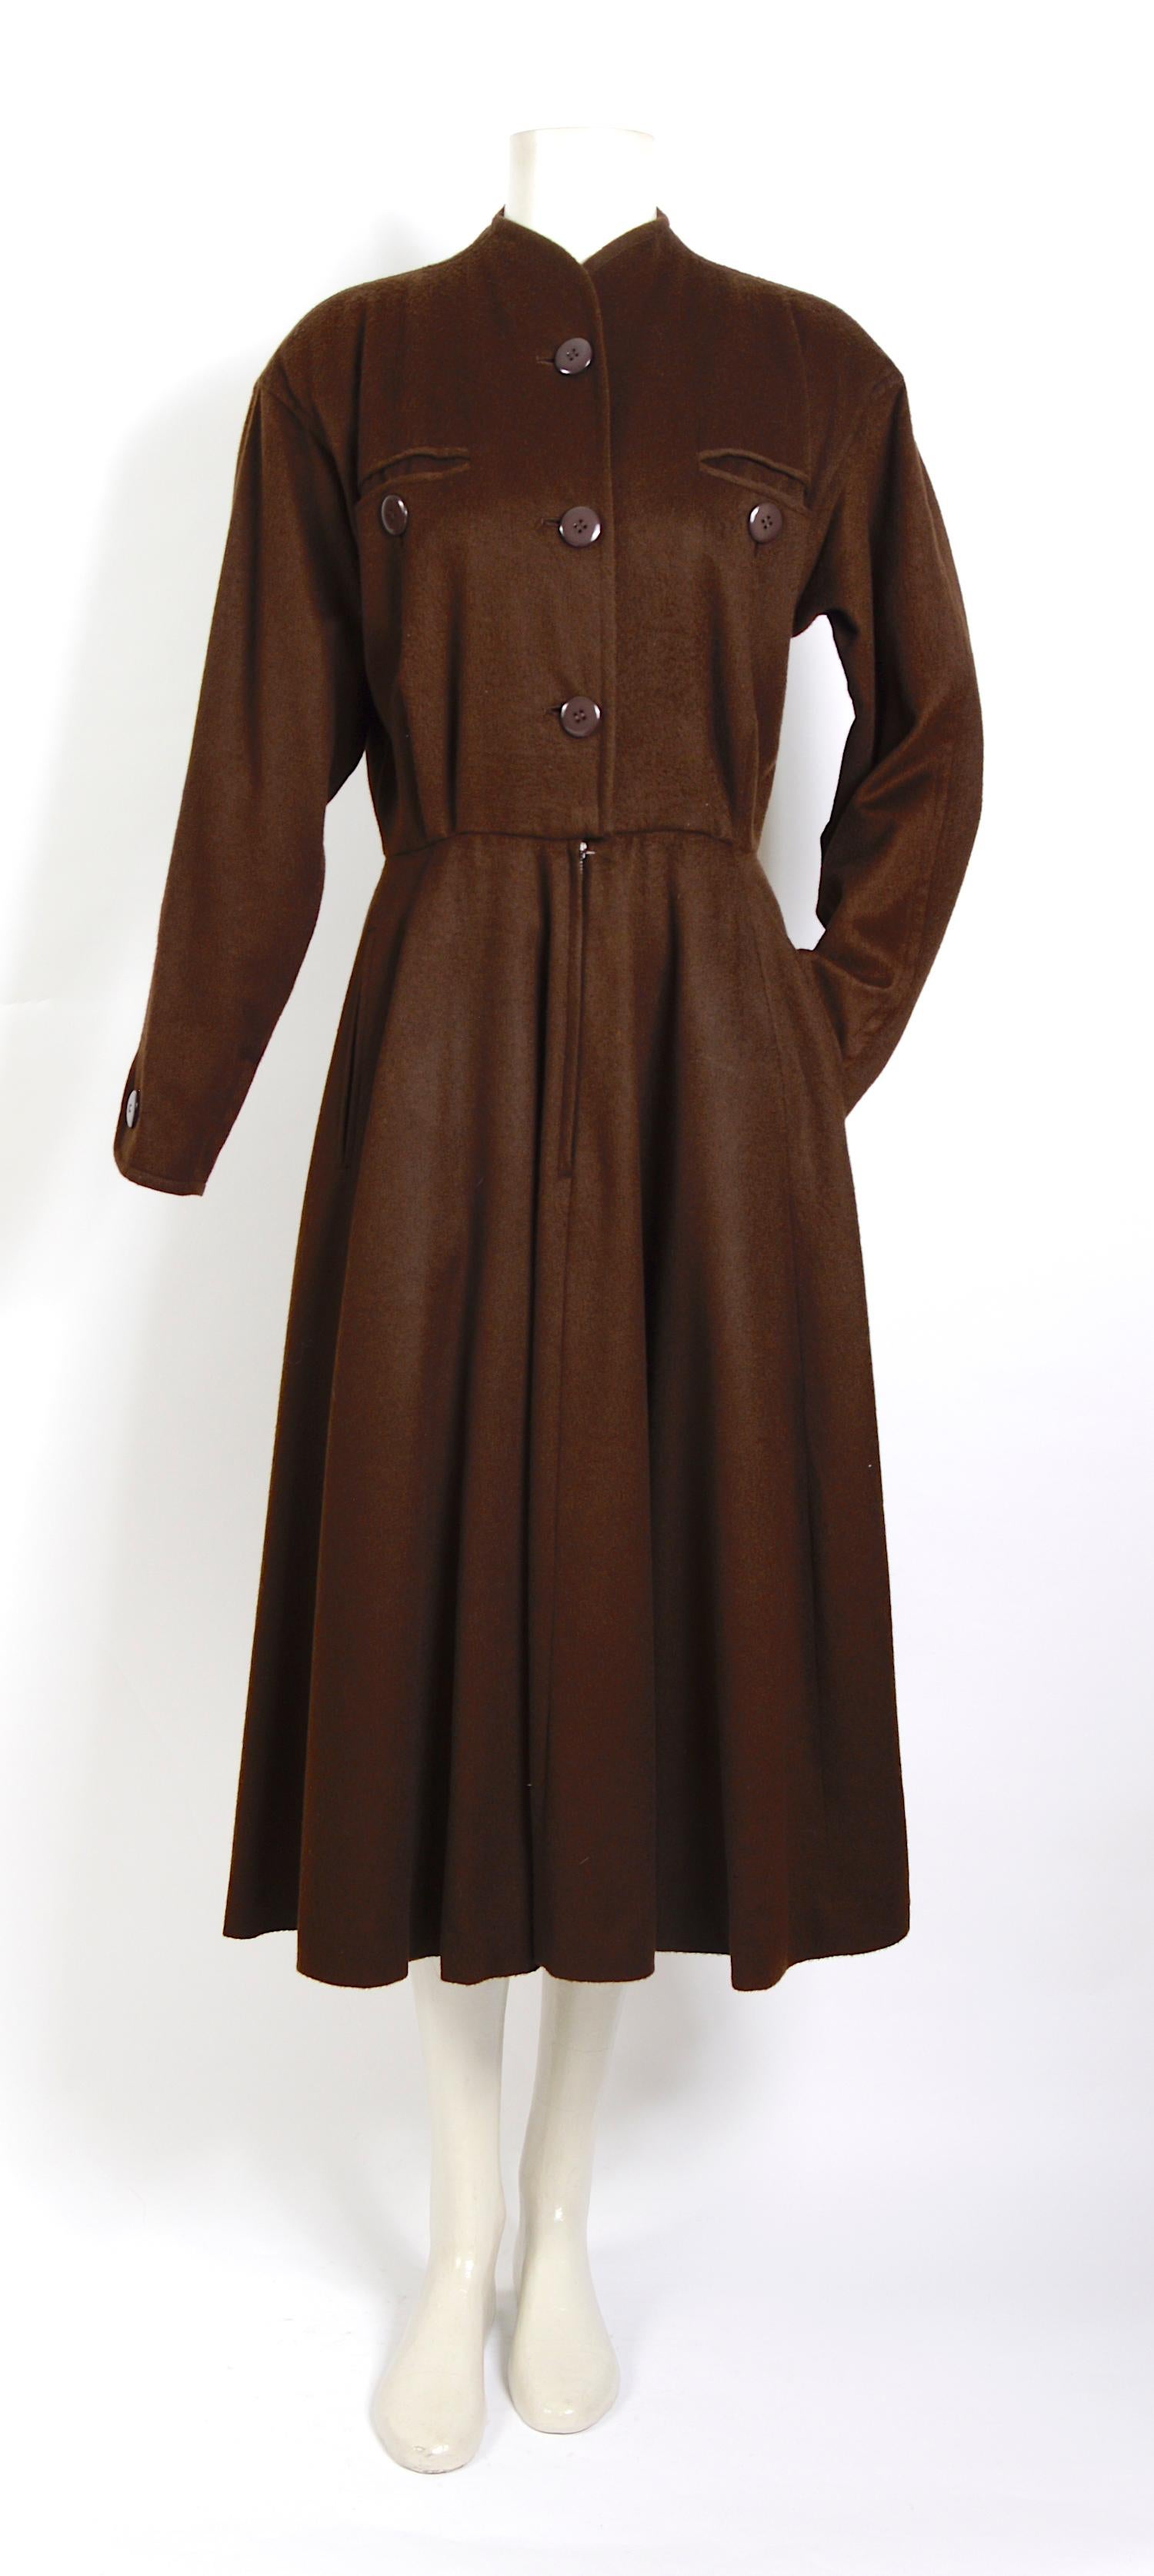 Vintage collectible 1970s brown wool dress by Yves Saint Laurent 